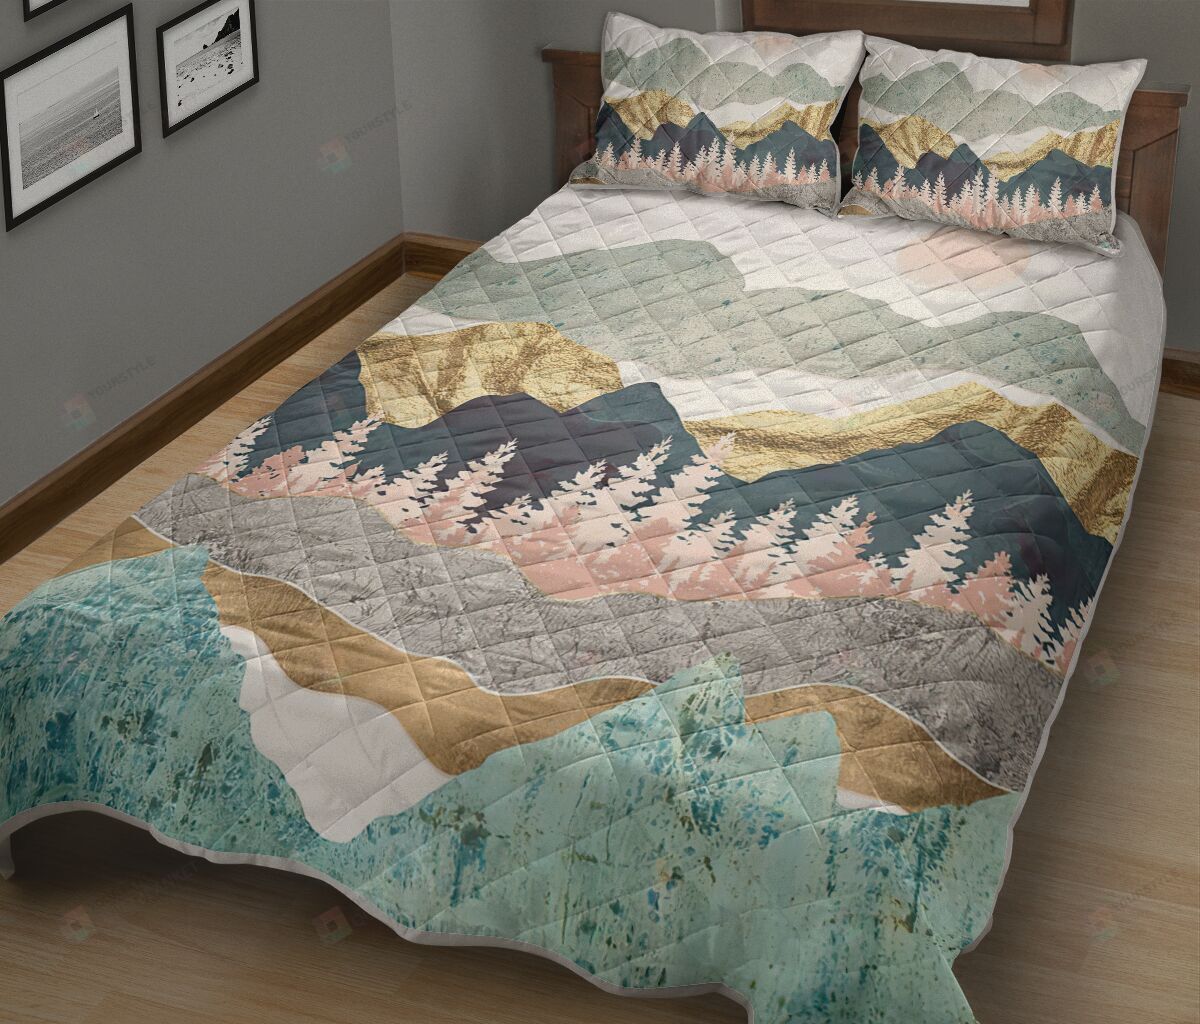 Hiking, Mountain Scenery Quilt Bed Sheets Spread Quilt Bedding Sets